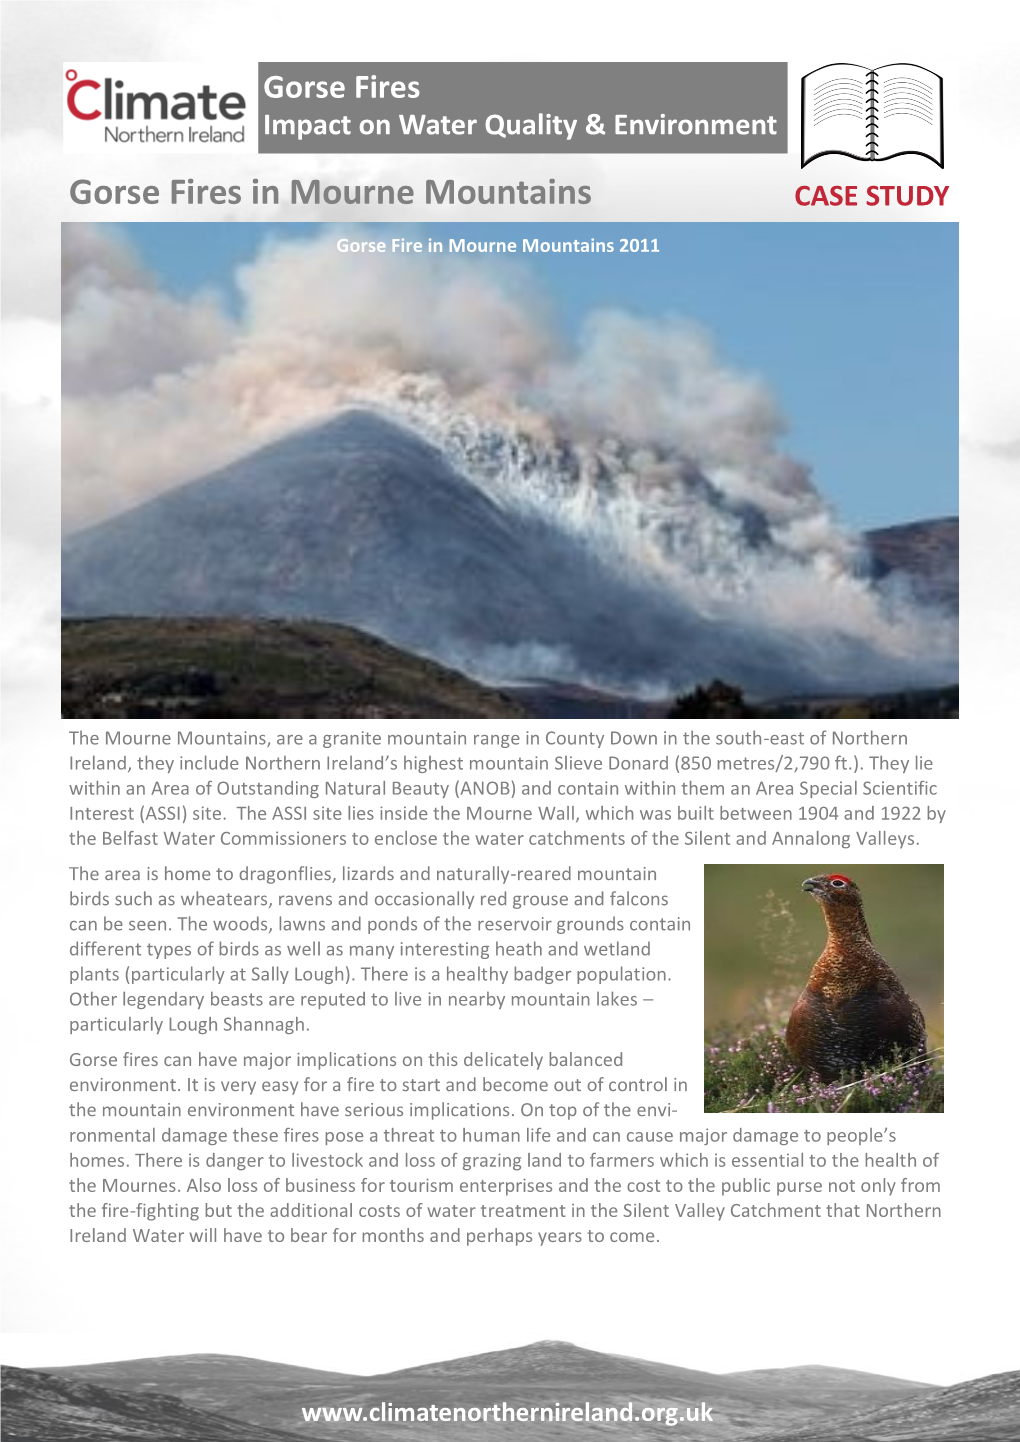 NI Water – Mourne Mountains Gorse Fires